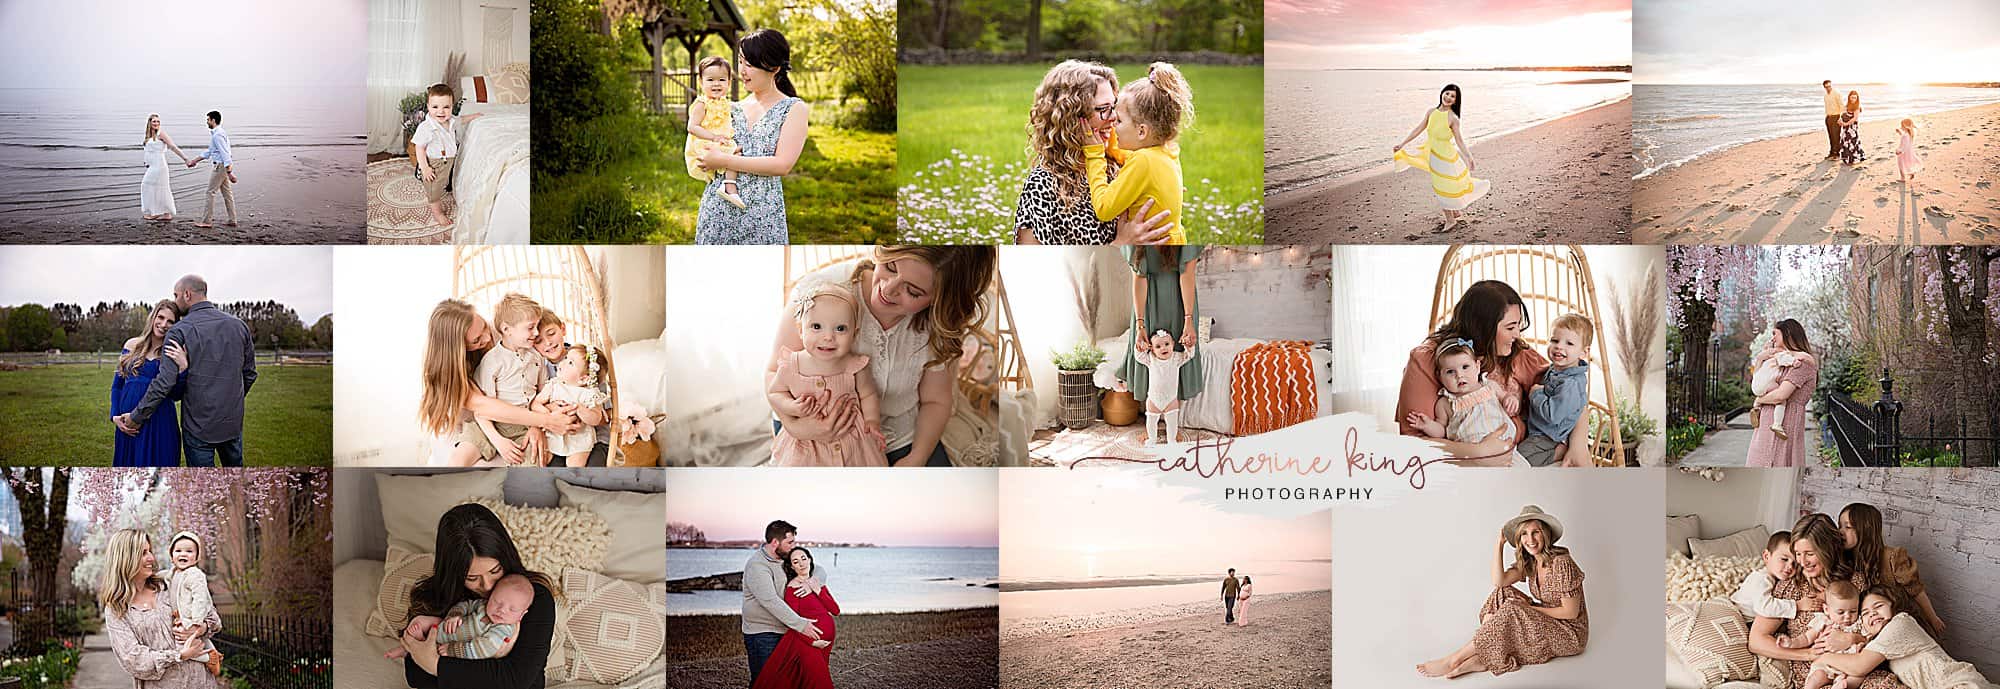 Unposed posing in family photography - creating authentic moments while keeping your clients looking great